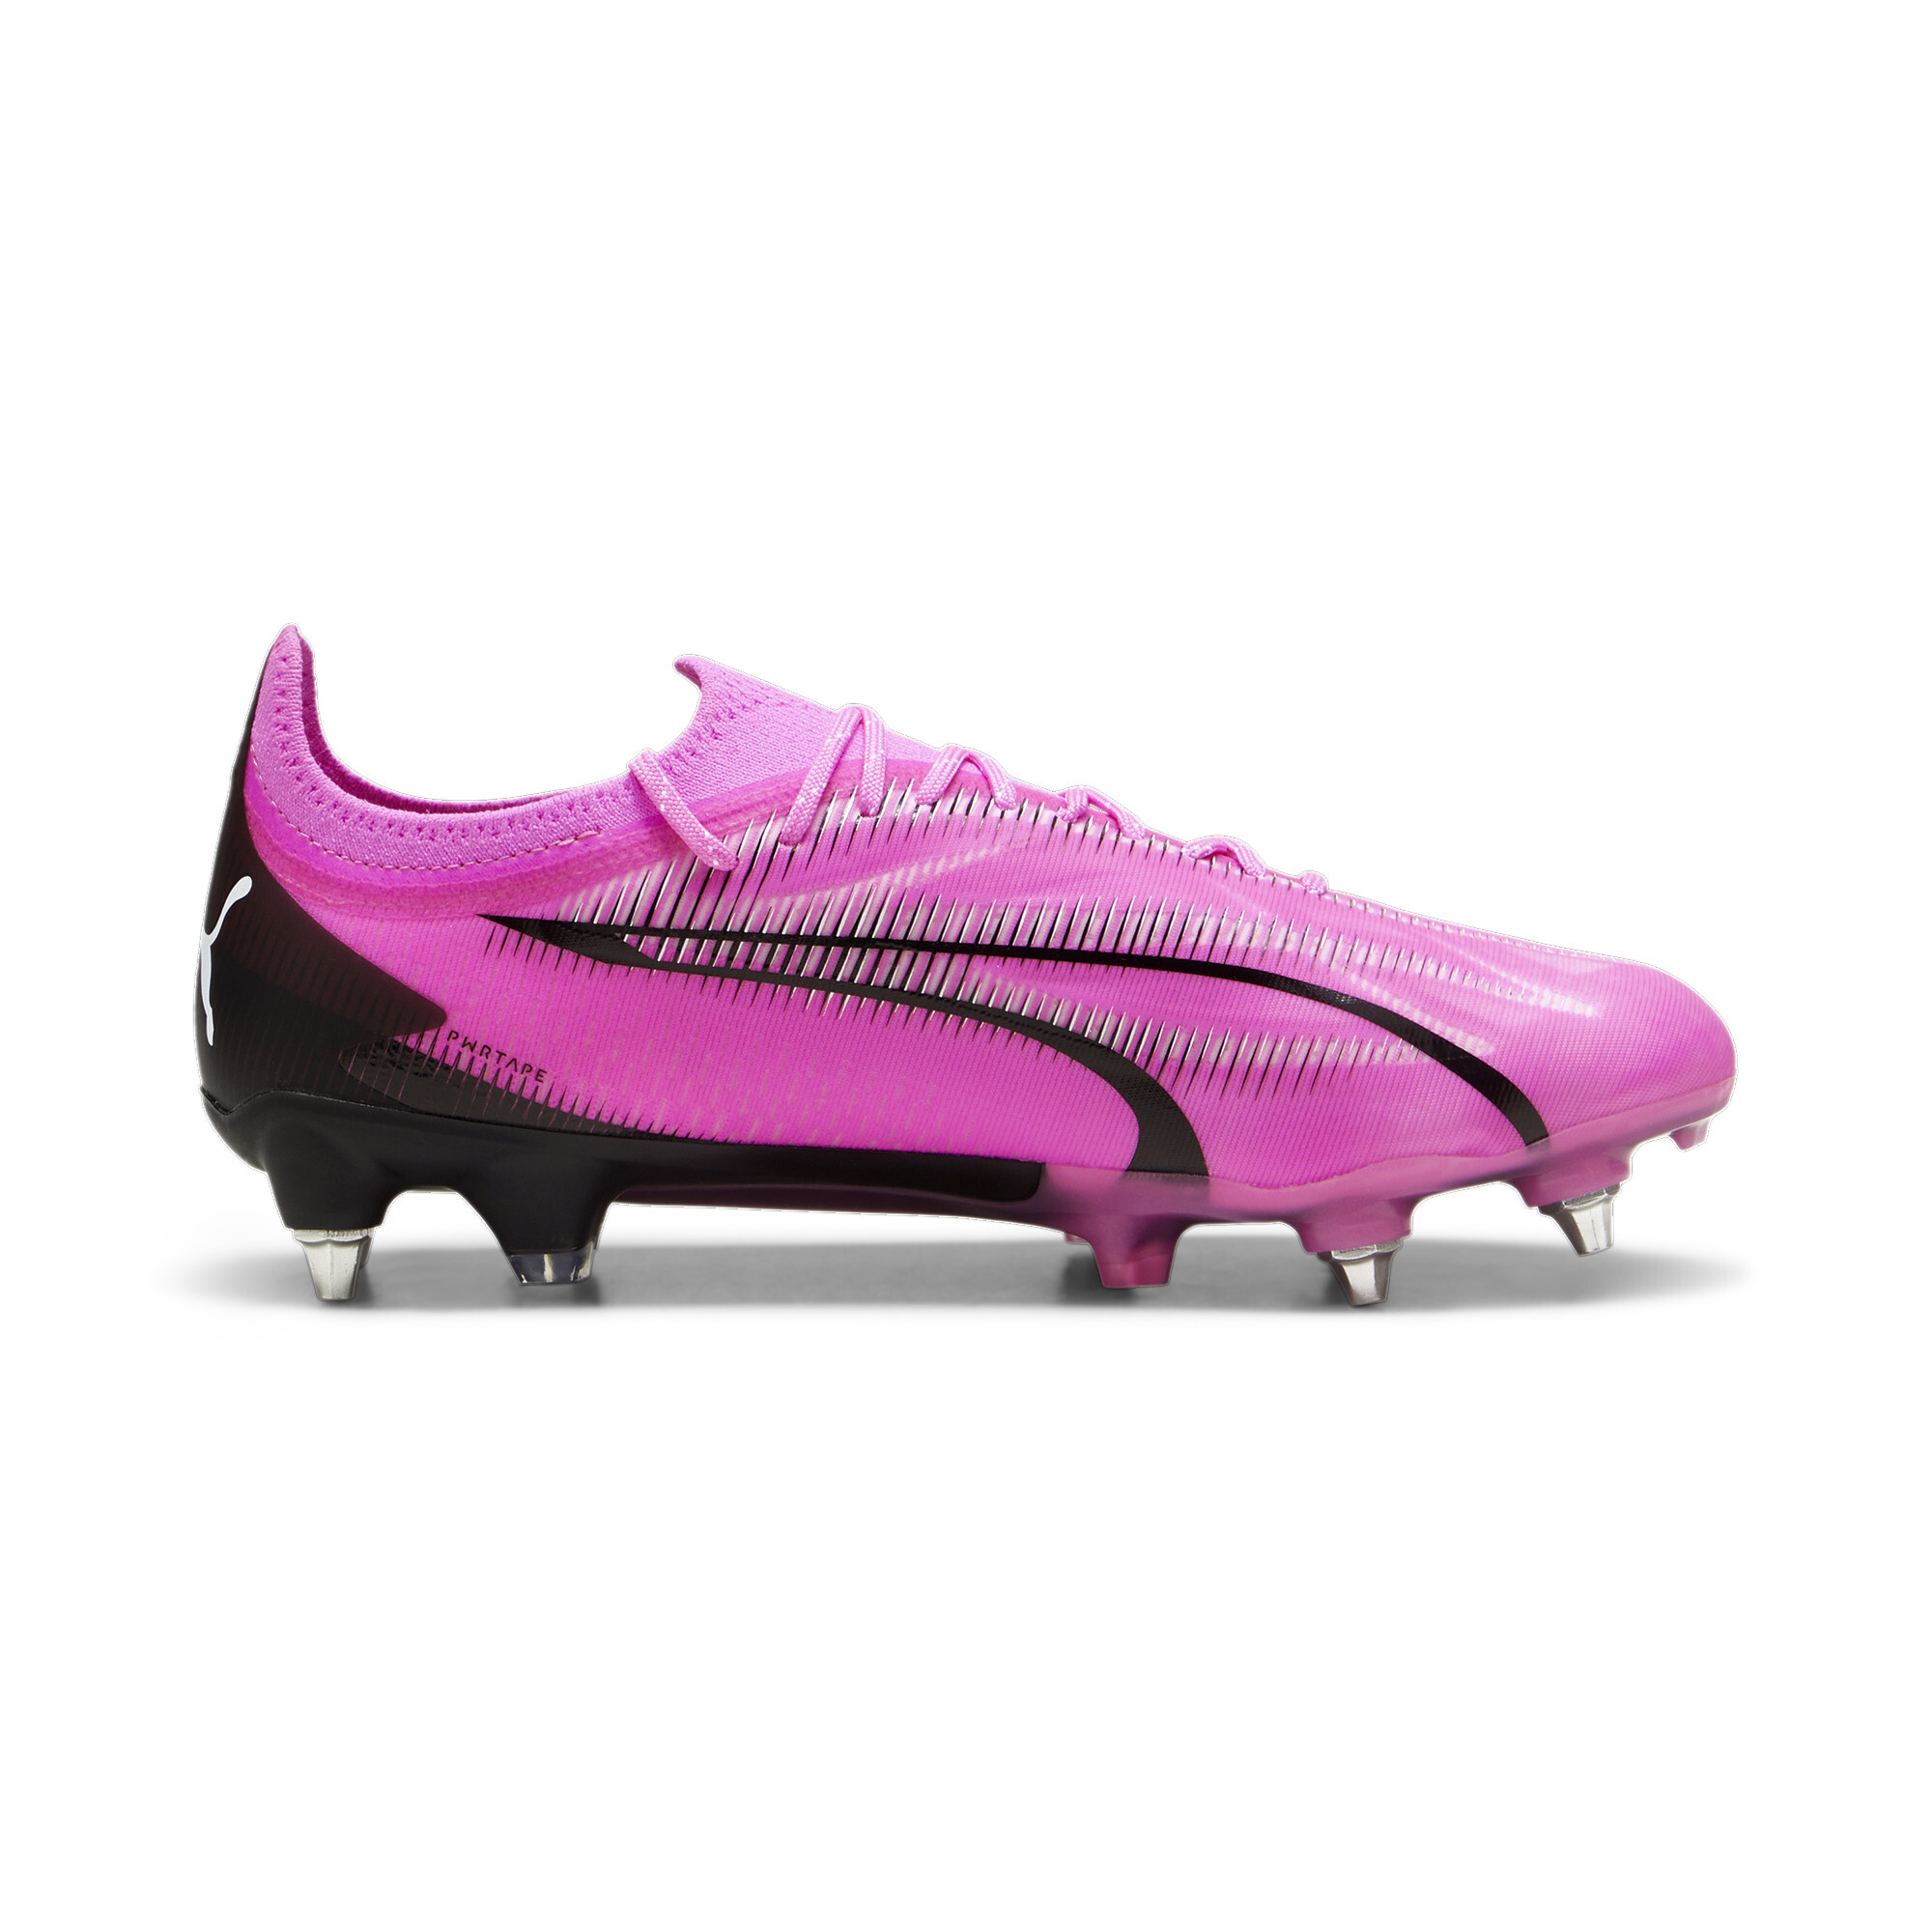 Puma ULTRA ULTIMATE Mx SG Football Boots, Pink, Size 37.5, Shoes